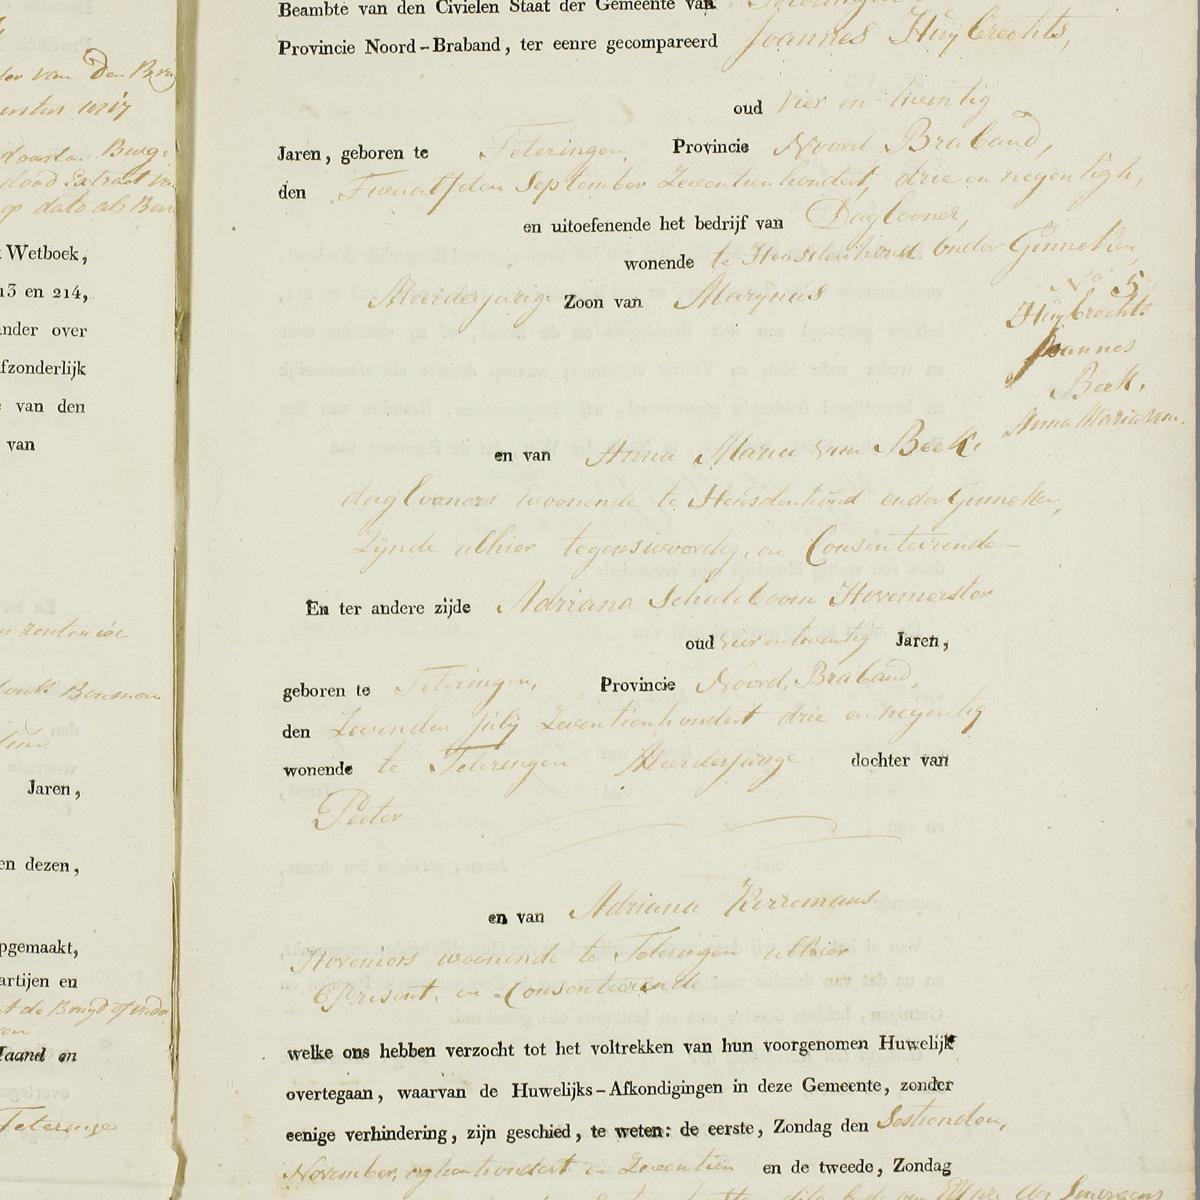 Civil registry of marriages, Teteringen,1817, record 5, right page